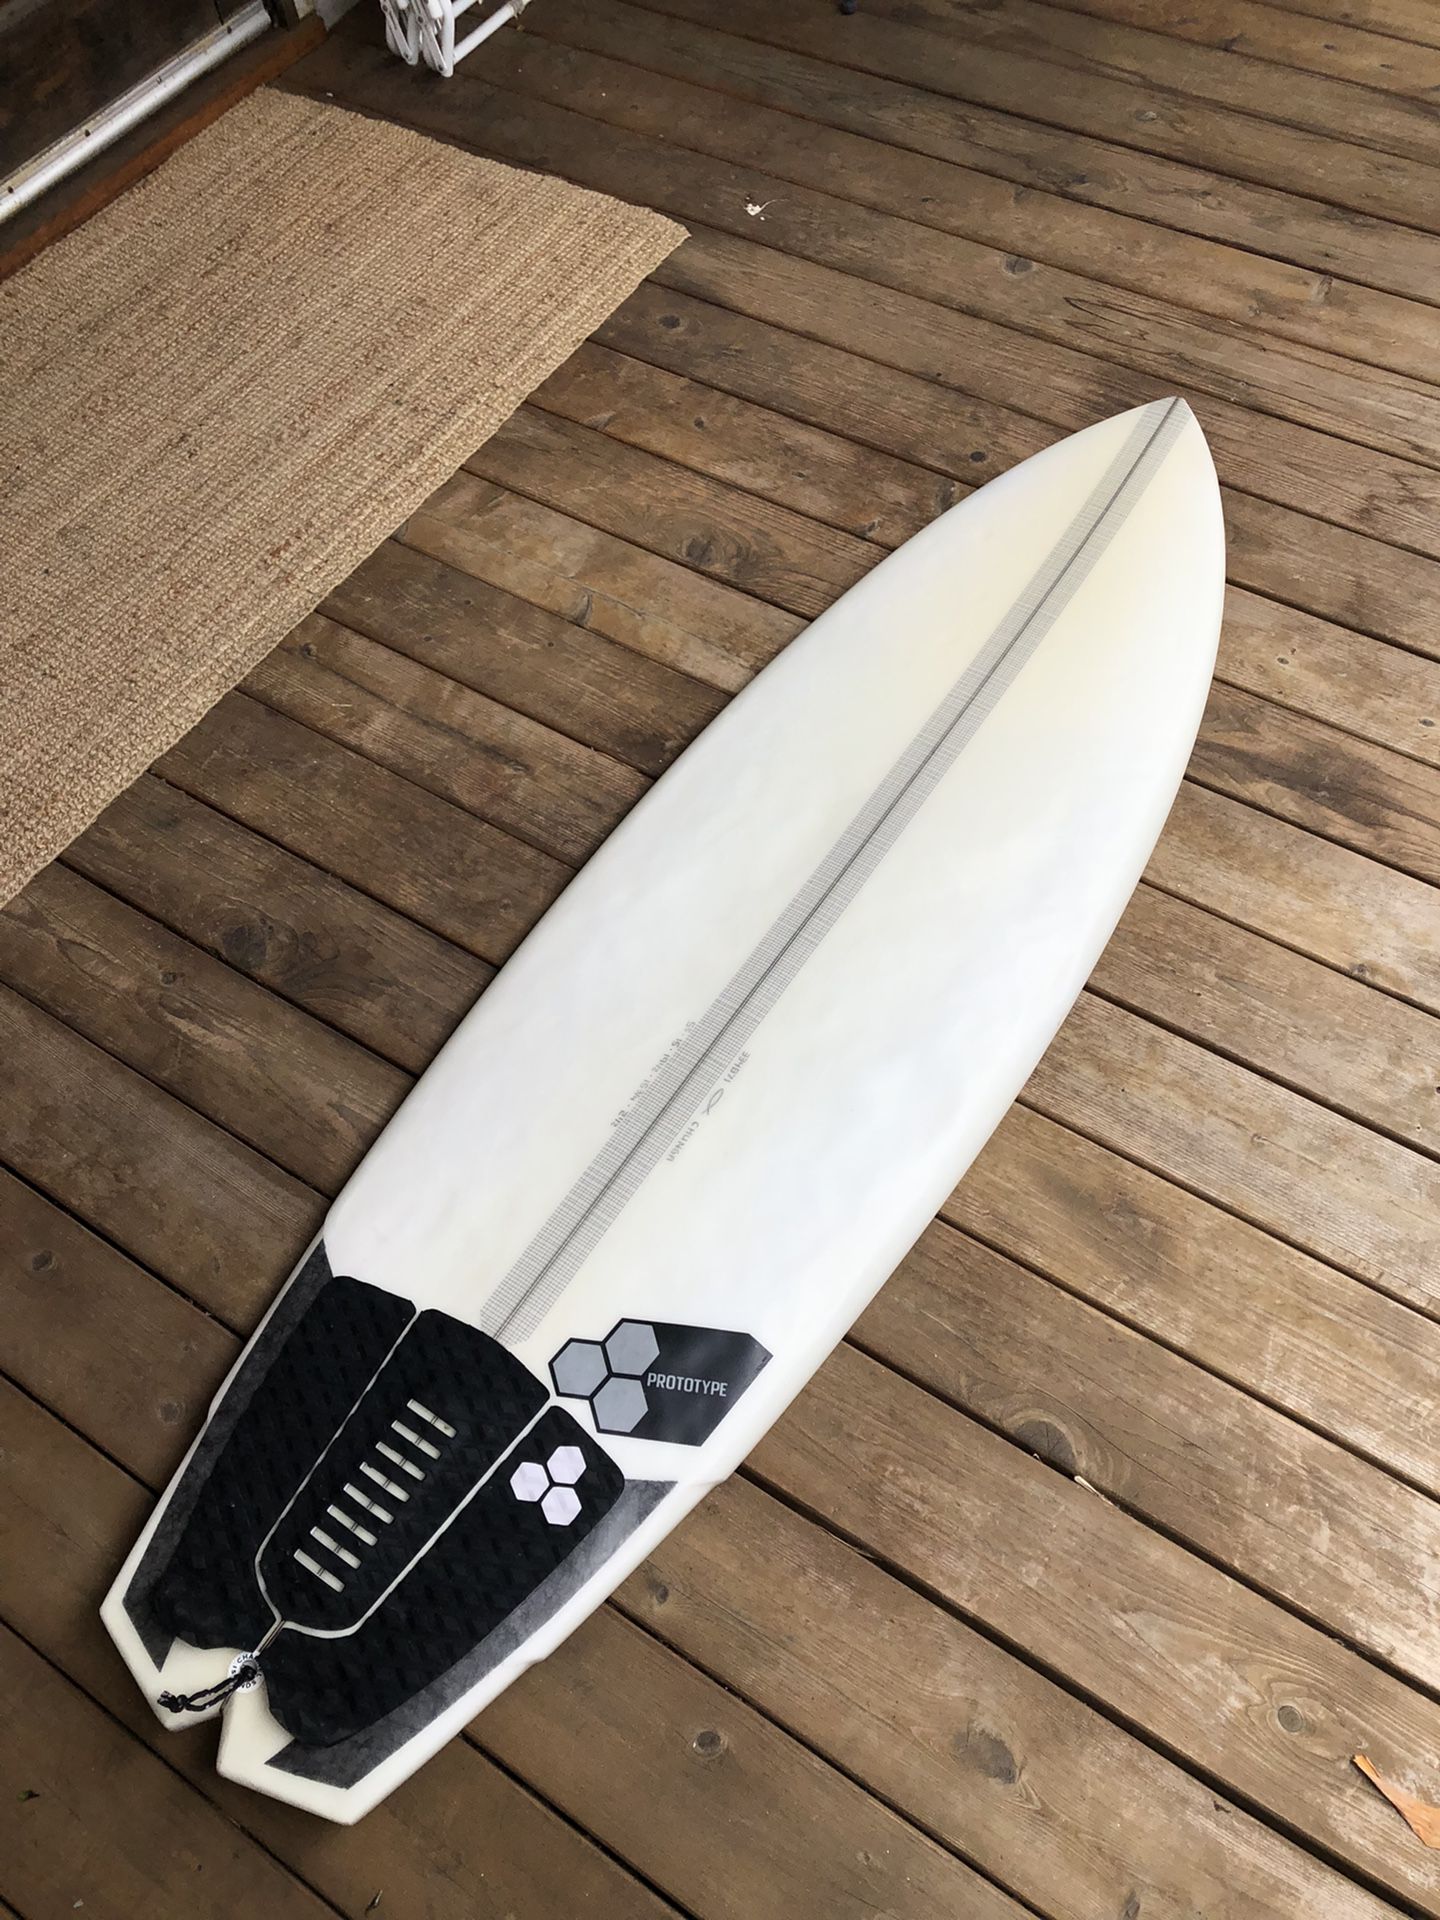 5’5” Channel Islands Bobby Quad Prototype Surfboard (29 Liters)